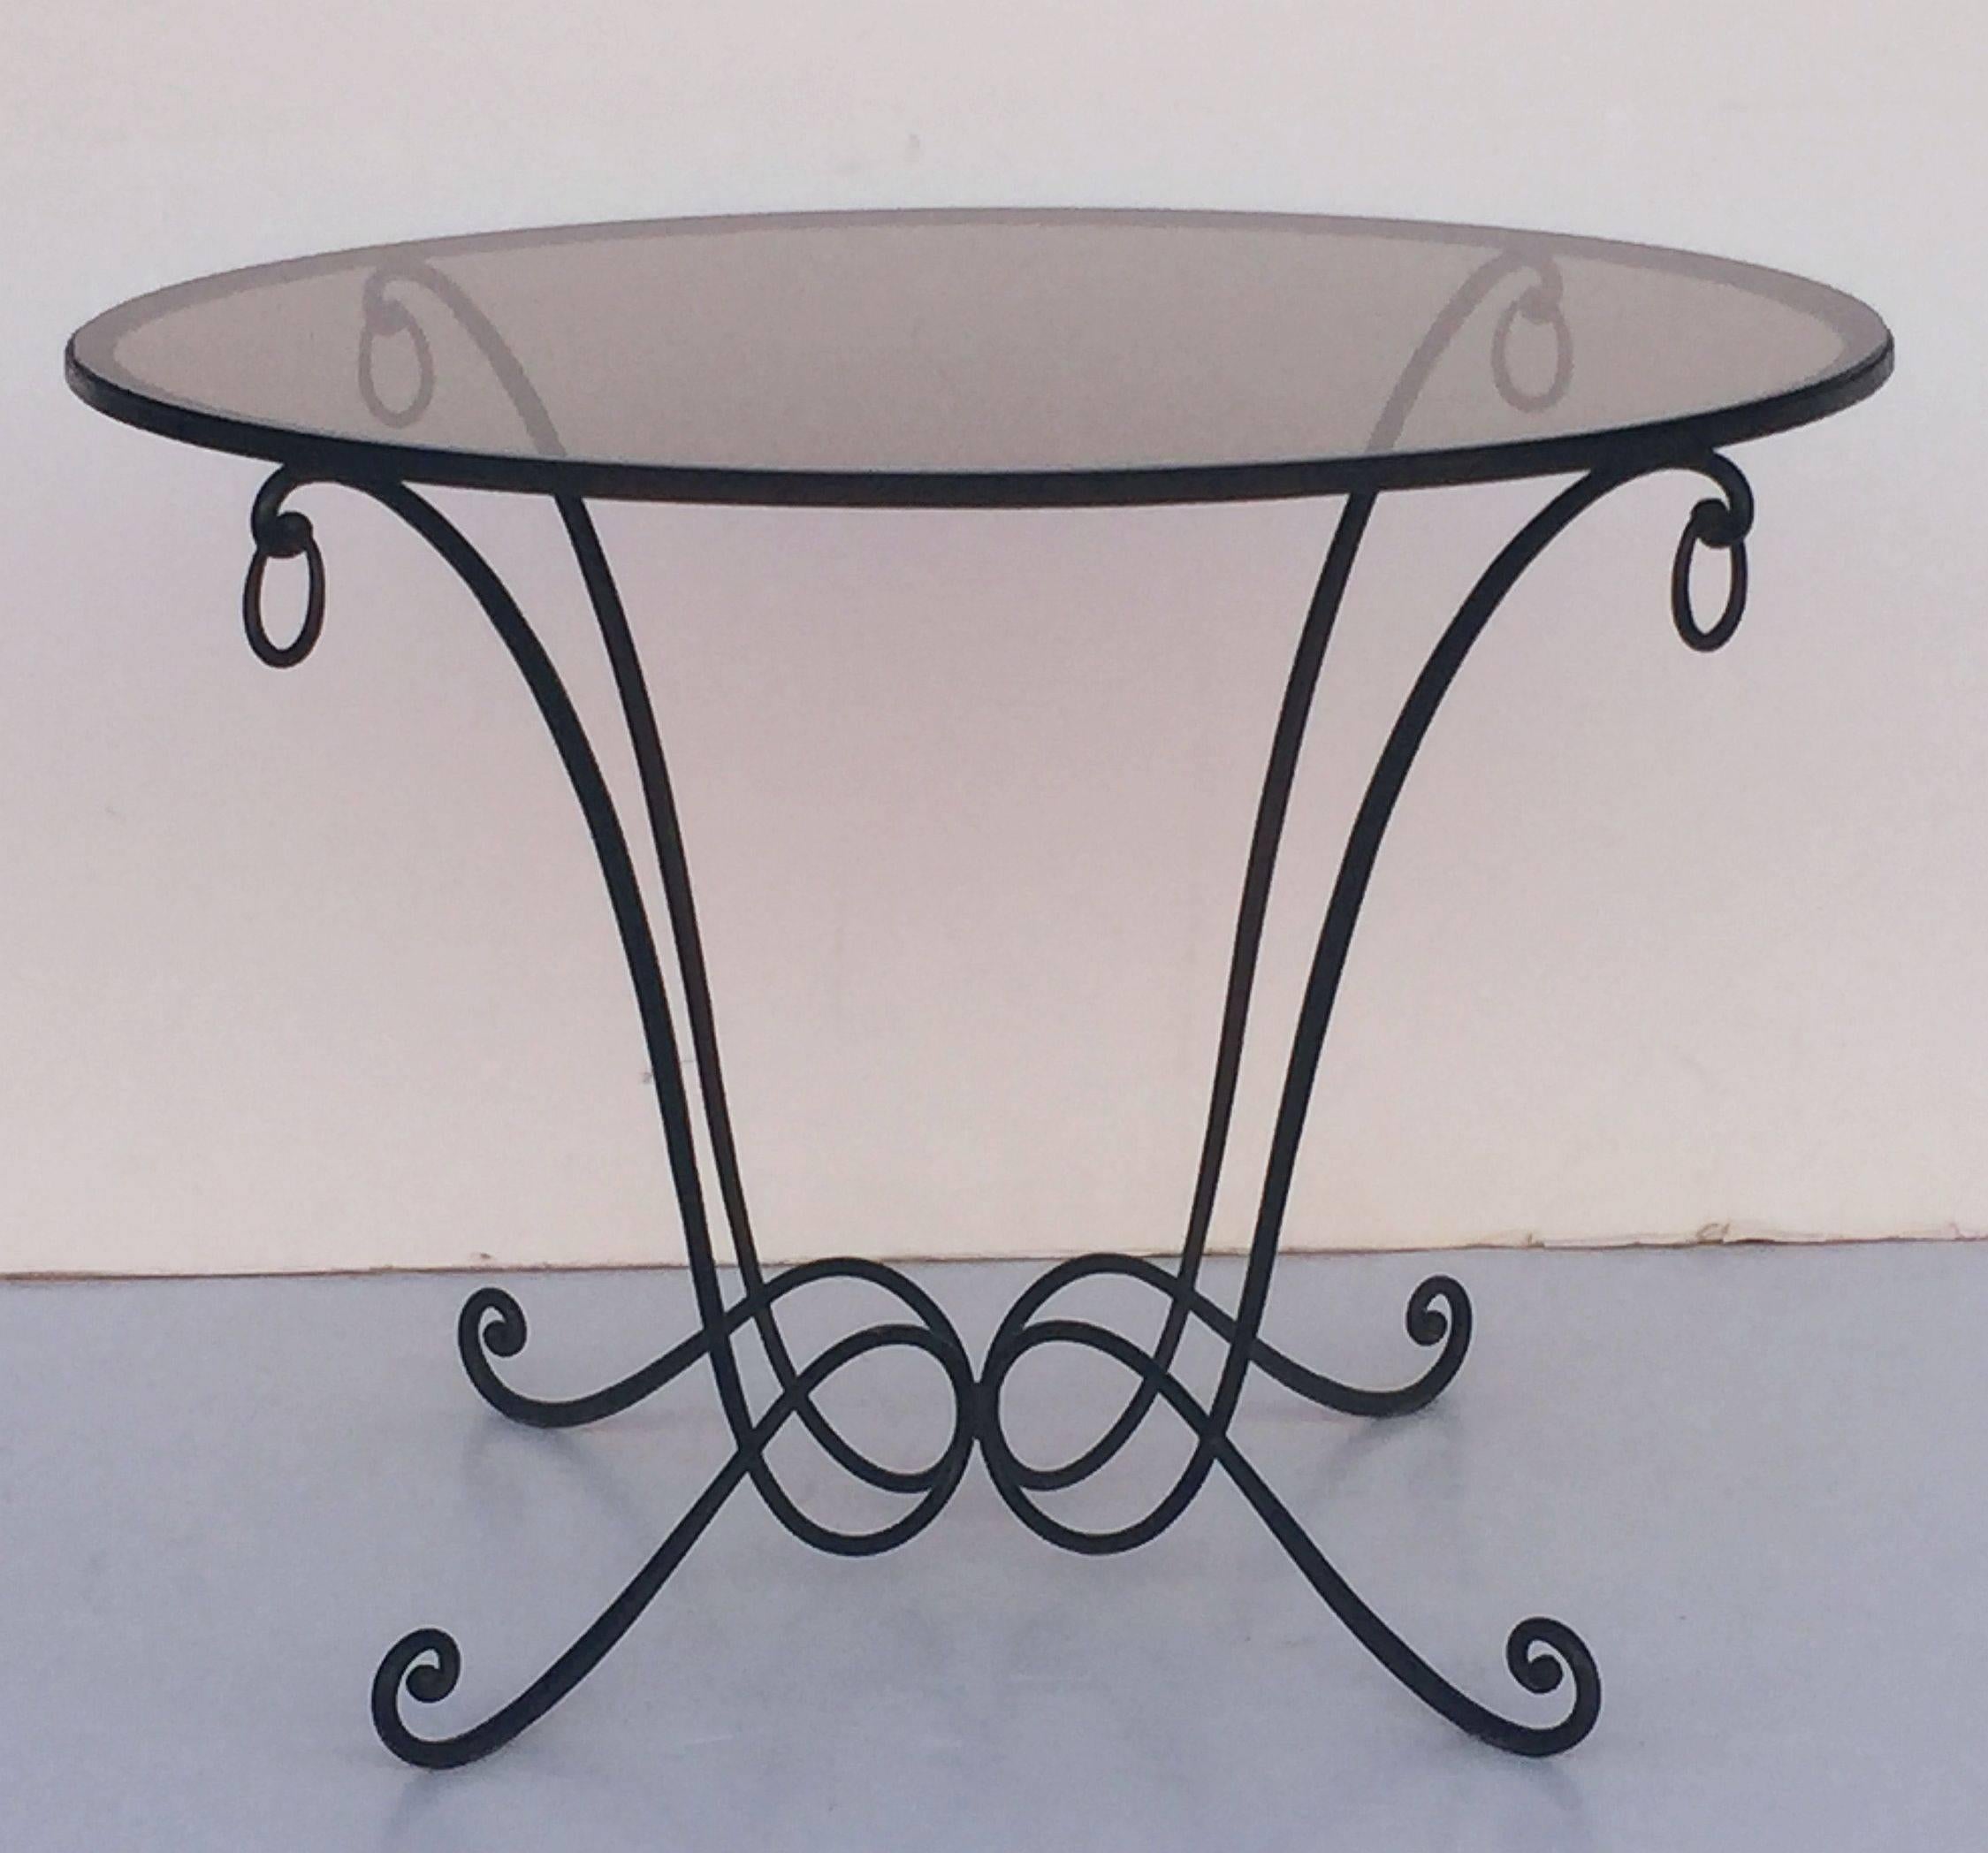 A fine French round table of wrought iron with a smoked glass circular top, featuring a design of four serpentine supports, ending in o-rings at top and scrolls at the base.

Can be used outdoors and indoors.